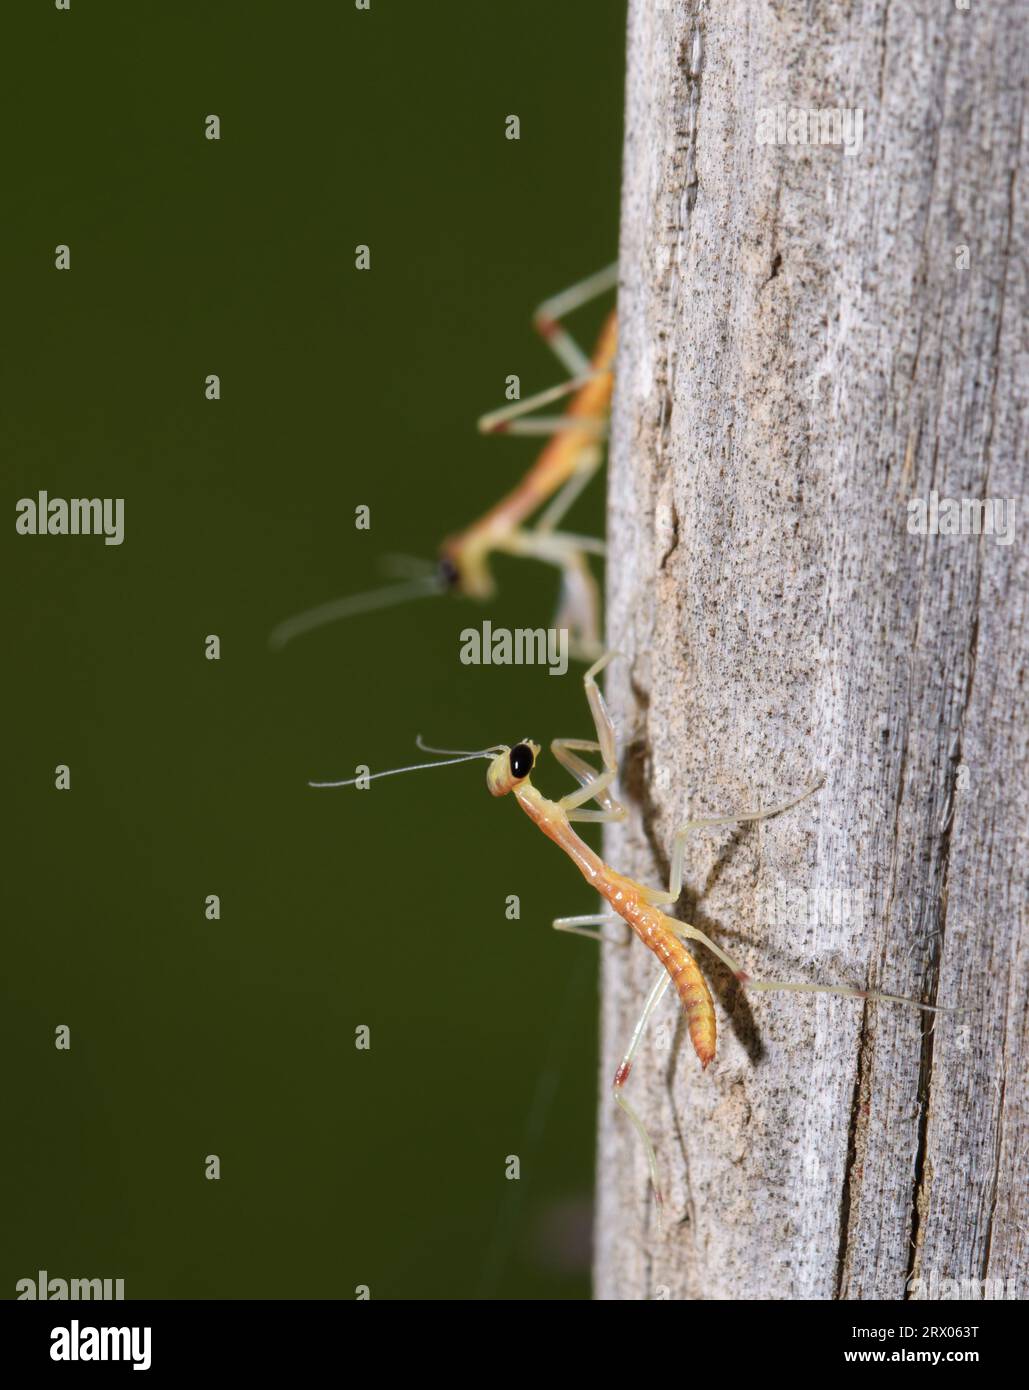 A tiny newly hatched Carolina mantid nymph on a wooden post, with another one out of focus a little farther back Stock Photo